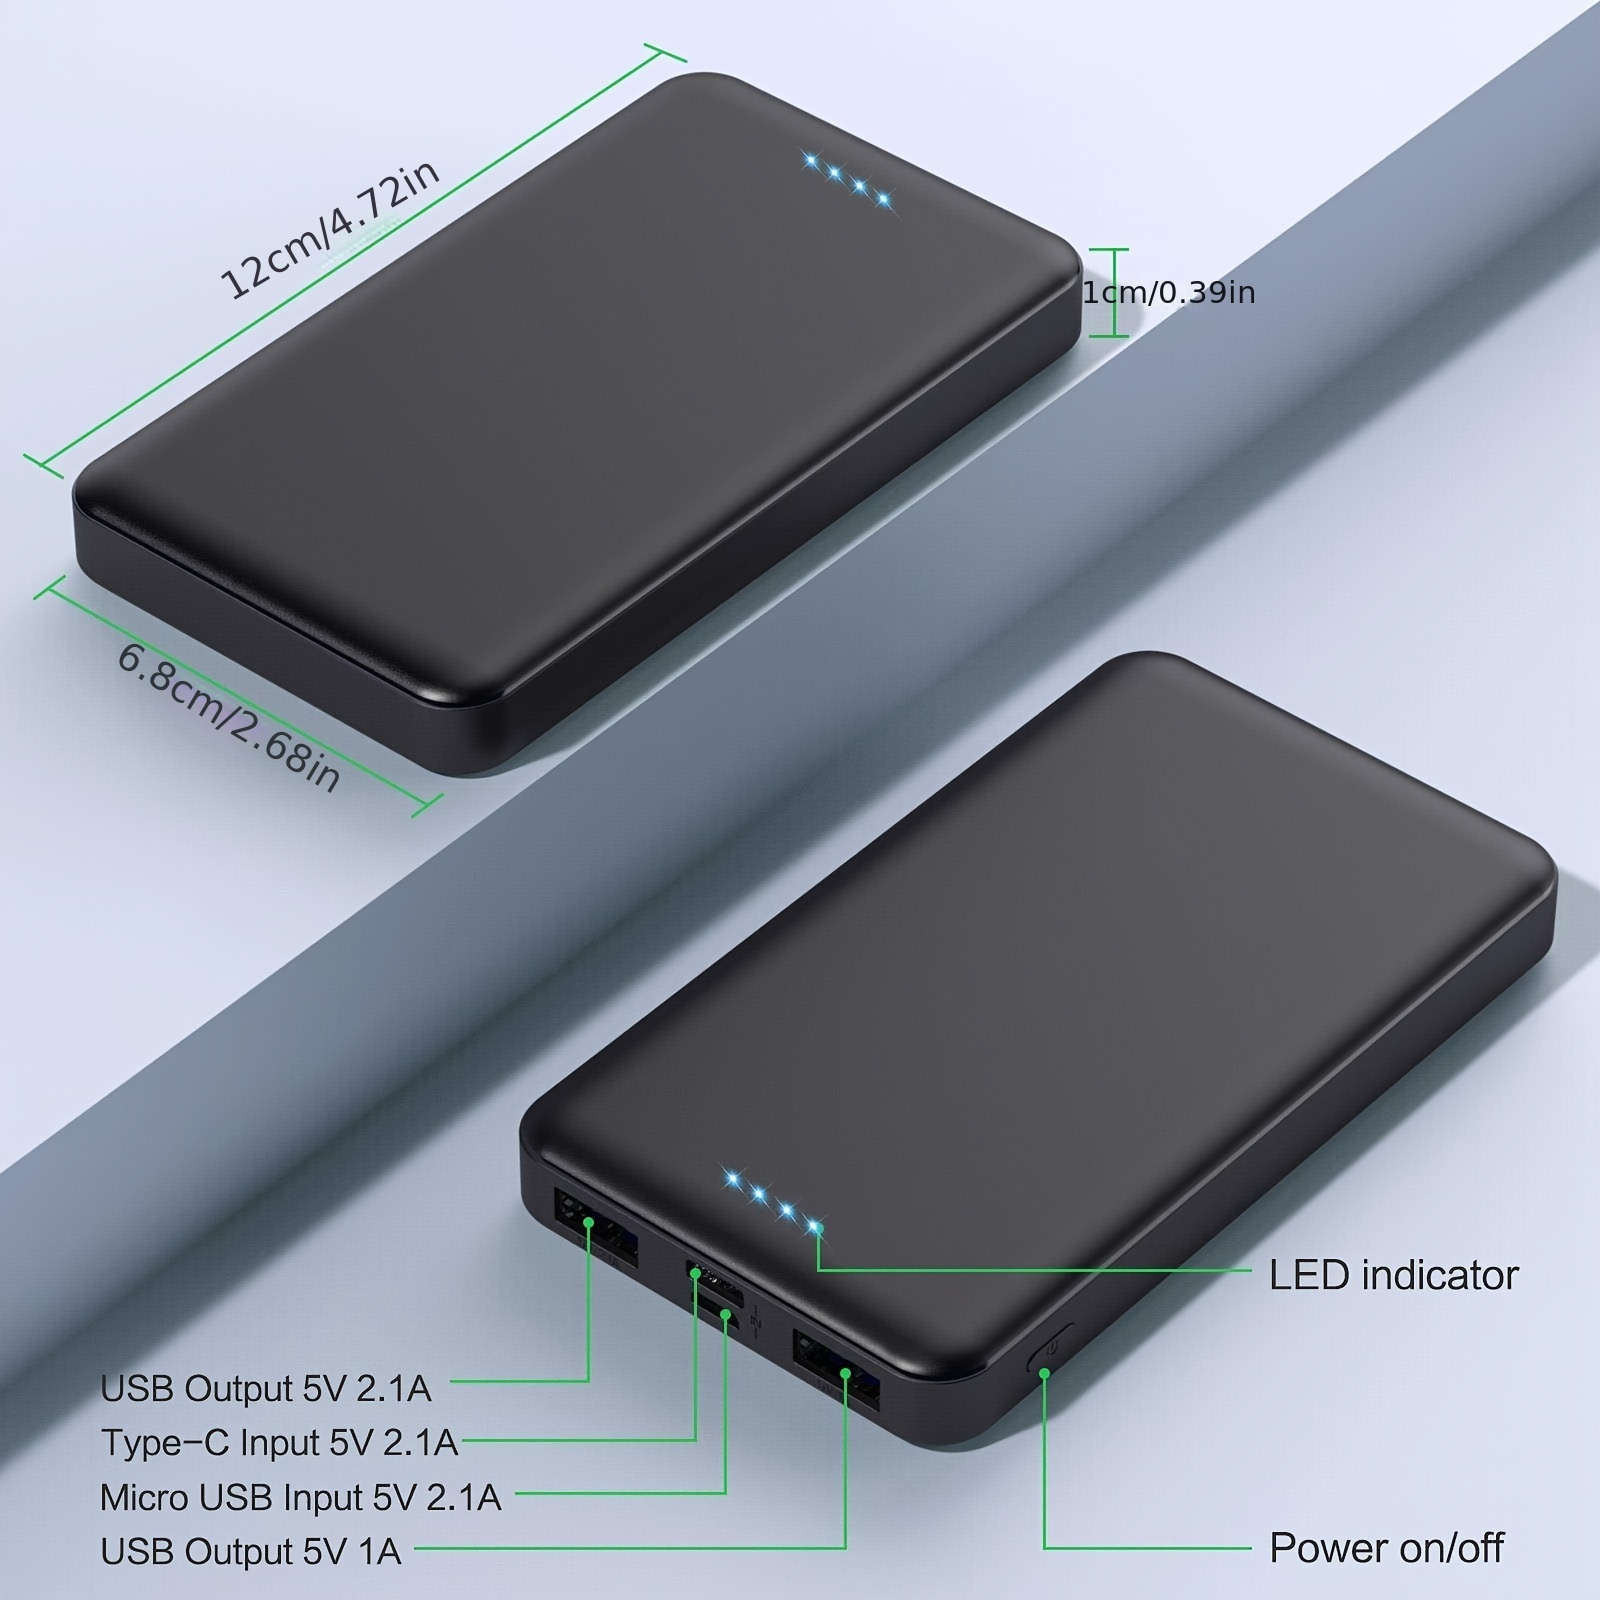 Portable Charger Power Bank 26800mah,Ultra-High Capacity Safer External  Cell Phone Battery Pack,2 USB Output High Speed Charging Power bank  Compatible